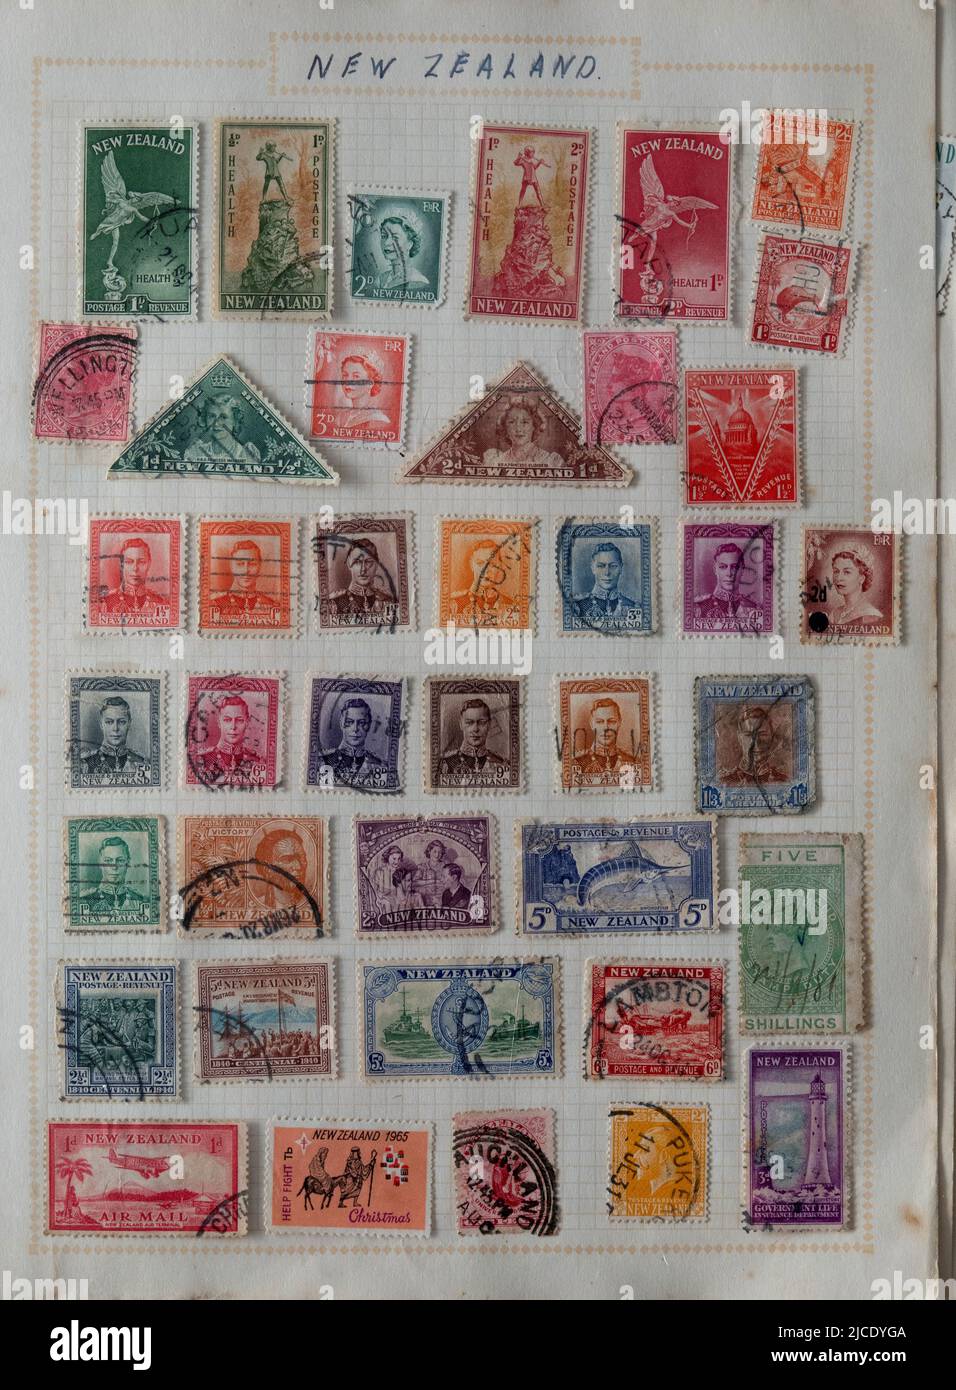 Page of historic New Zealand stamps Stock Photo